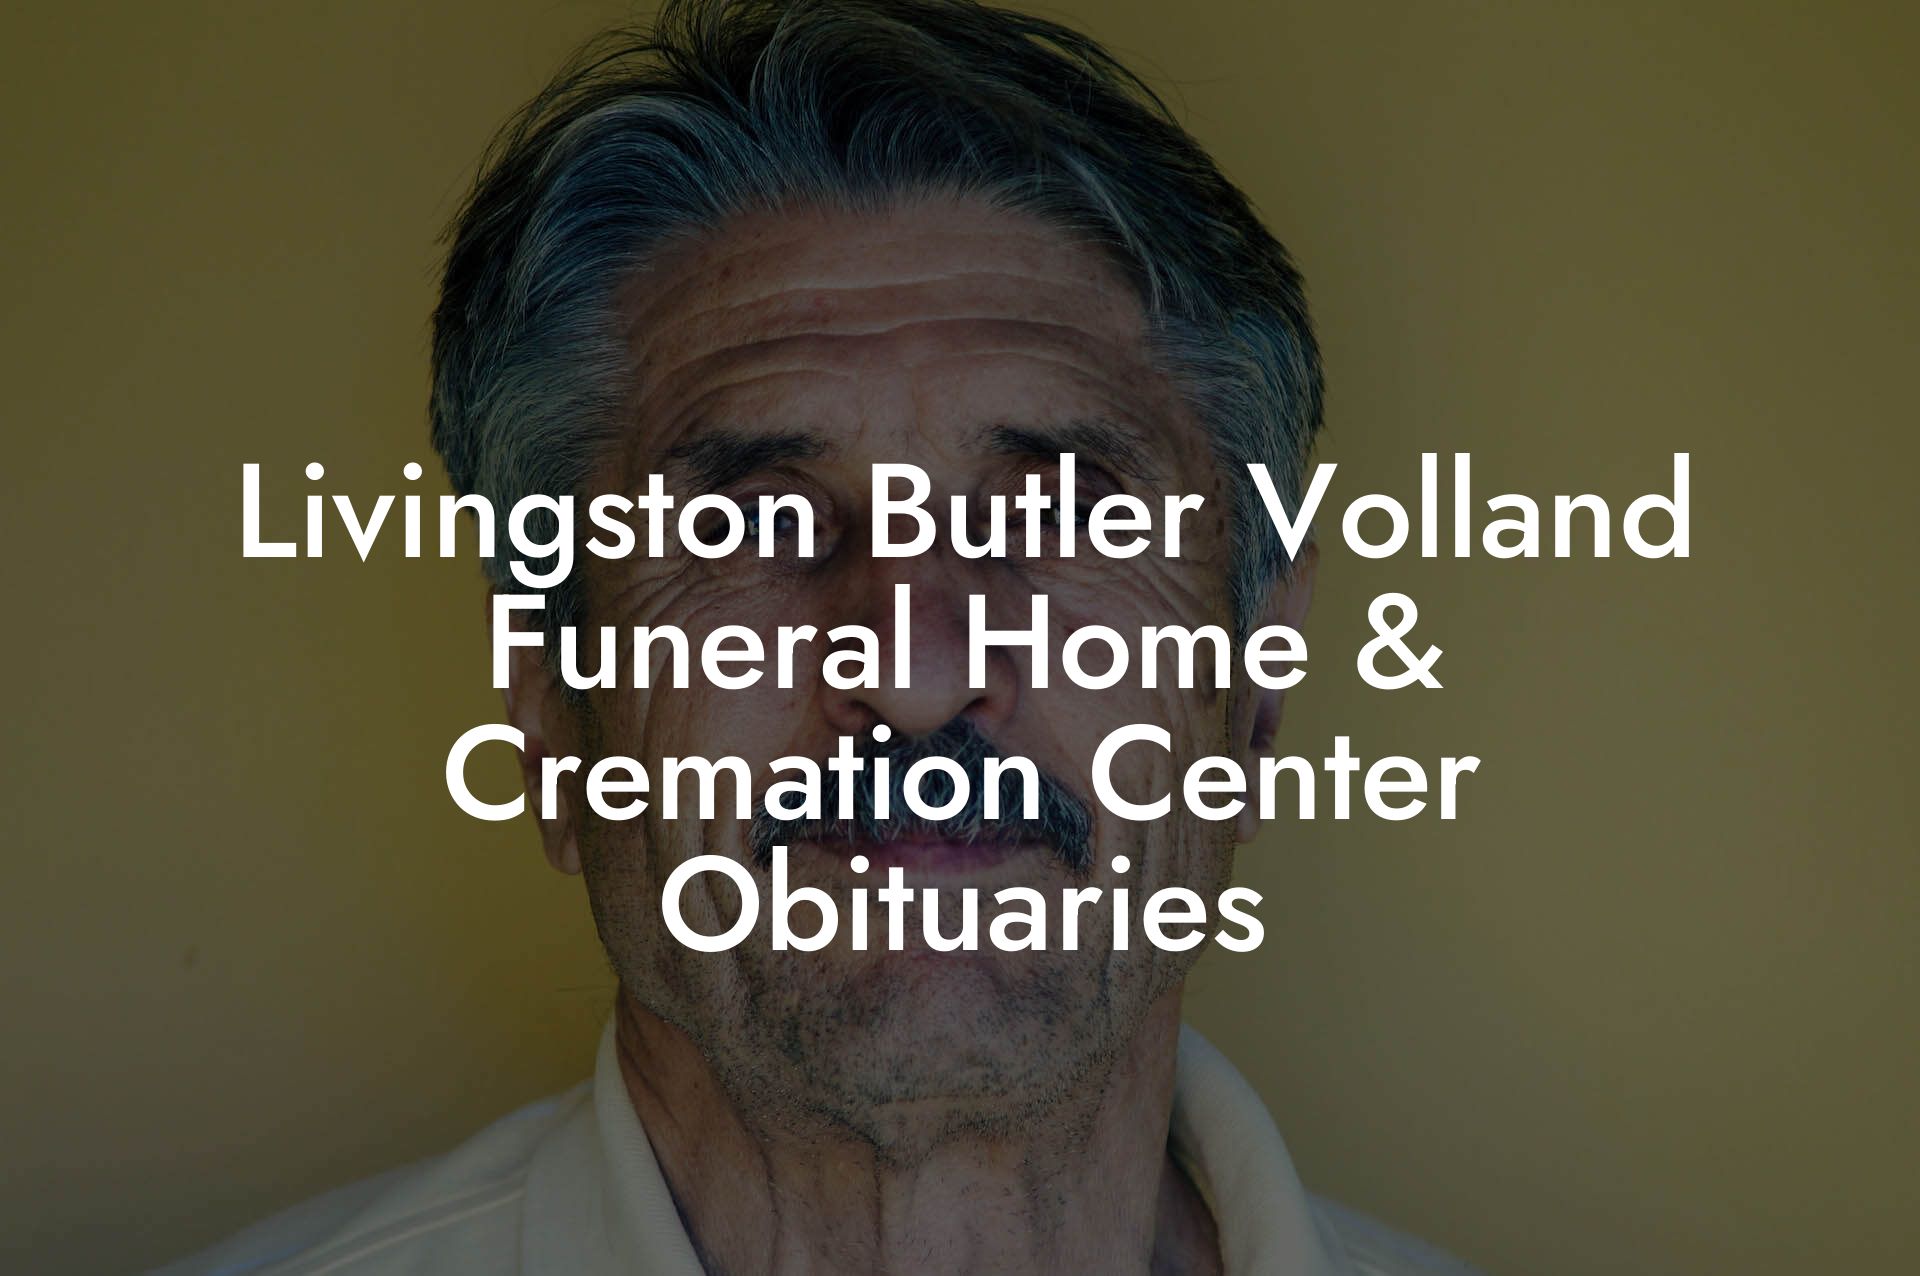 Livingston Butler Volland Funeral Home & Cremation Center Obituaries